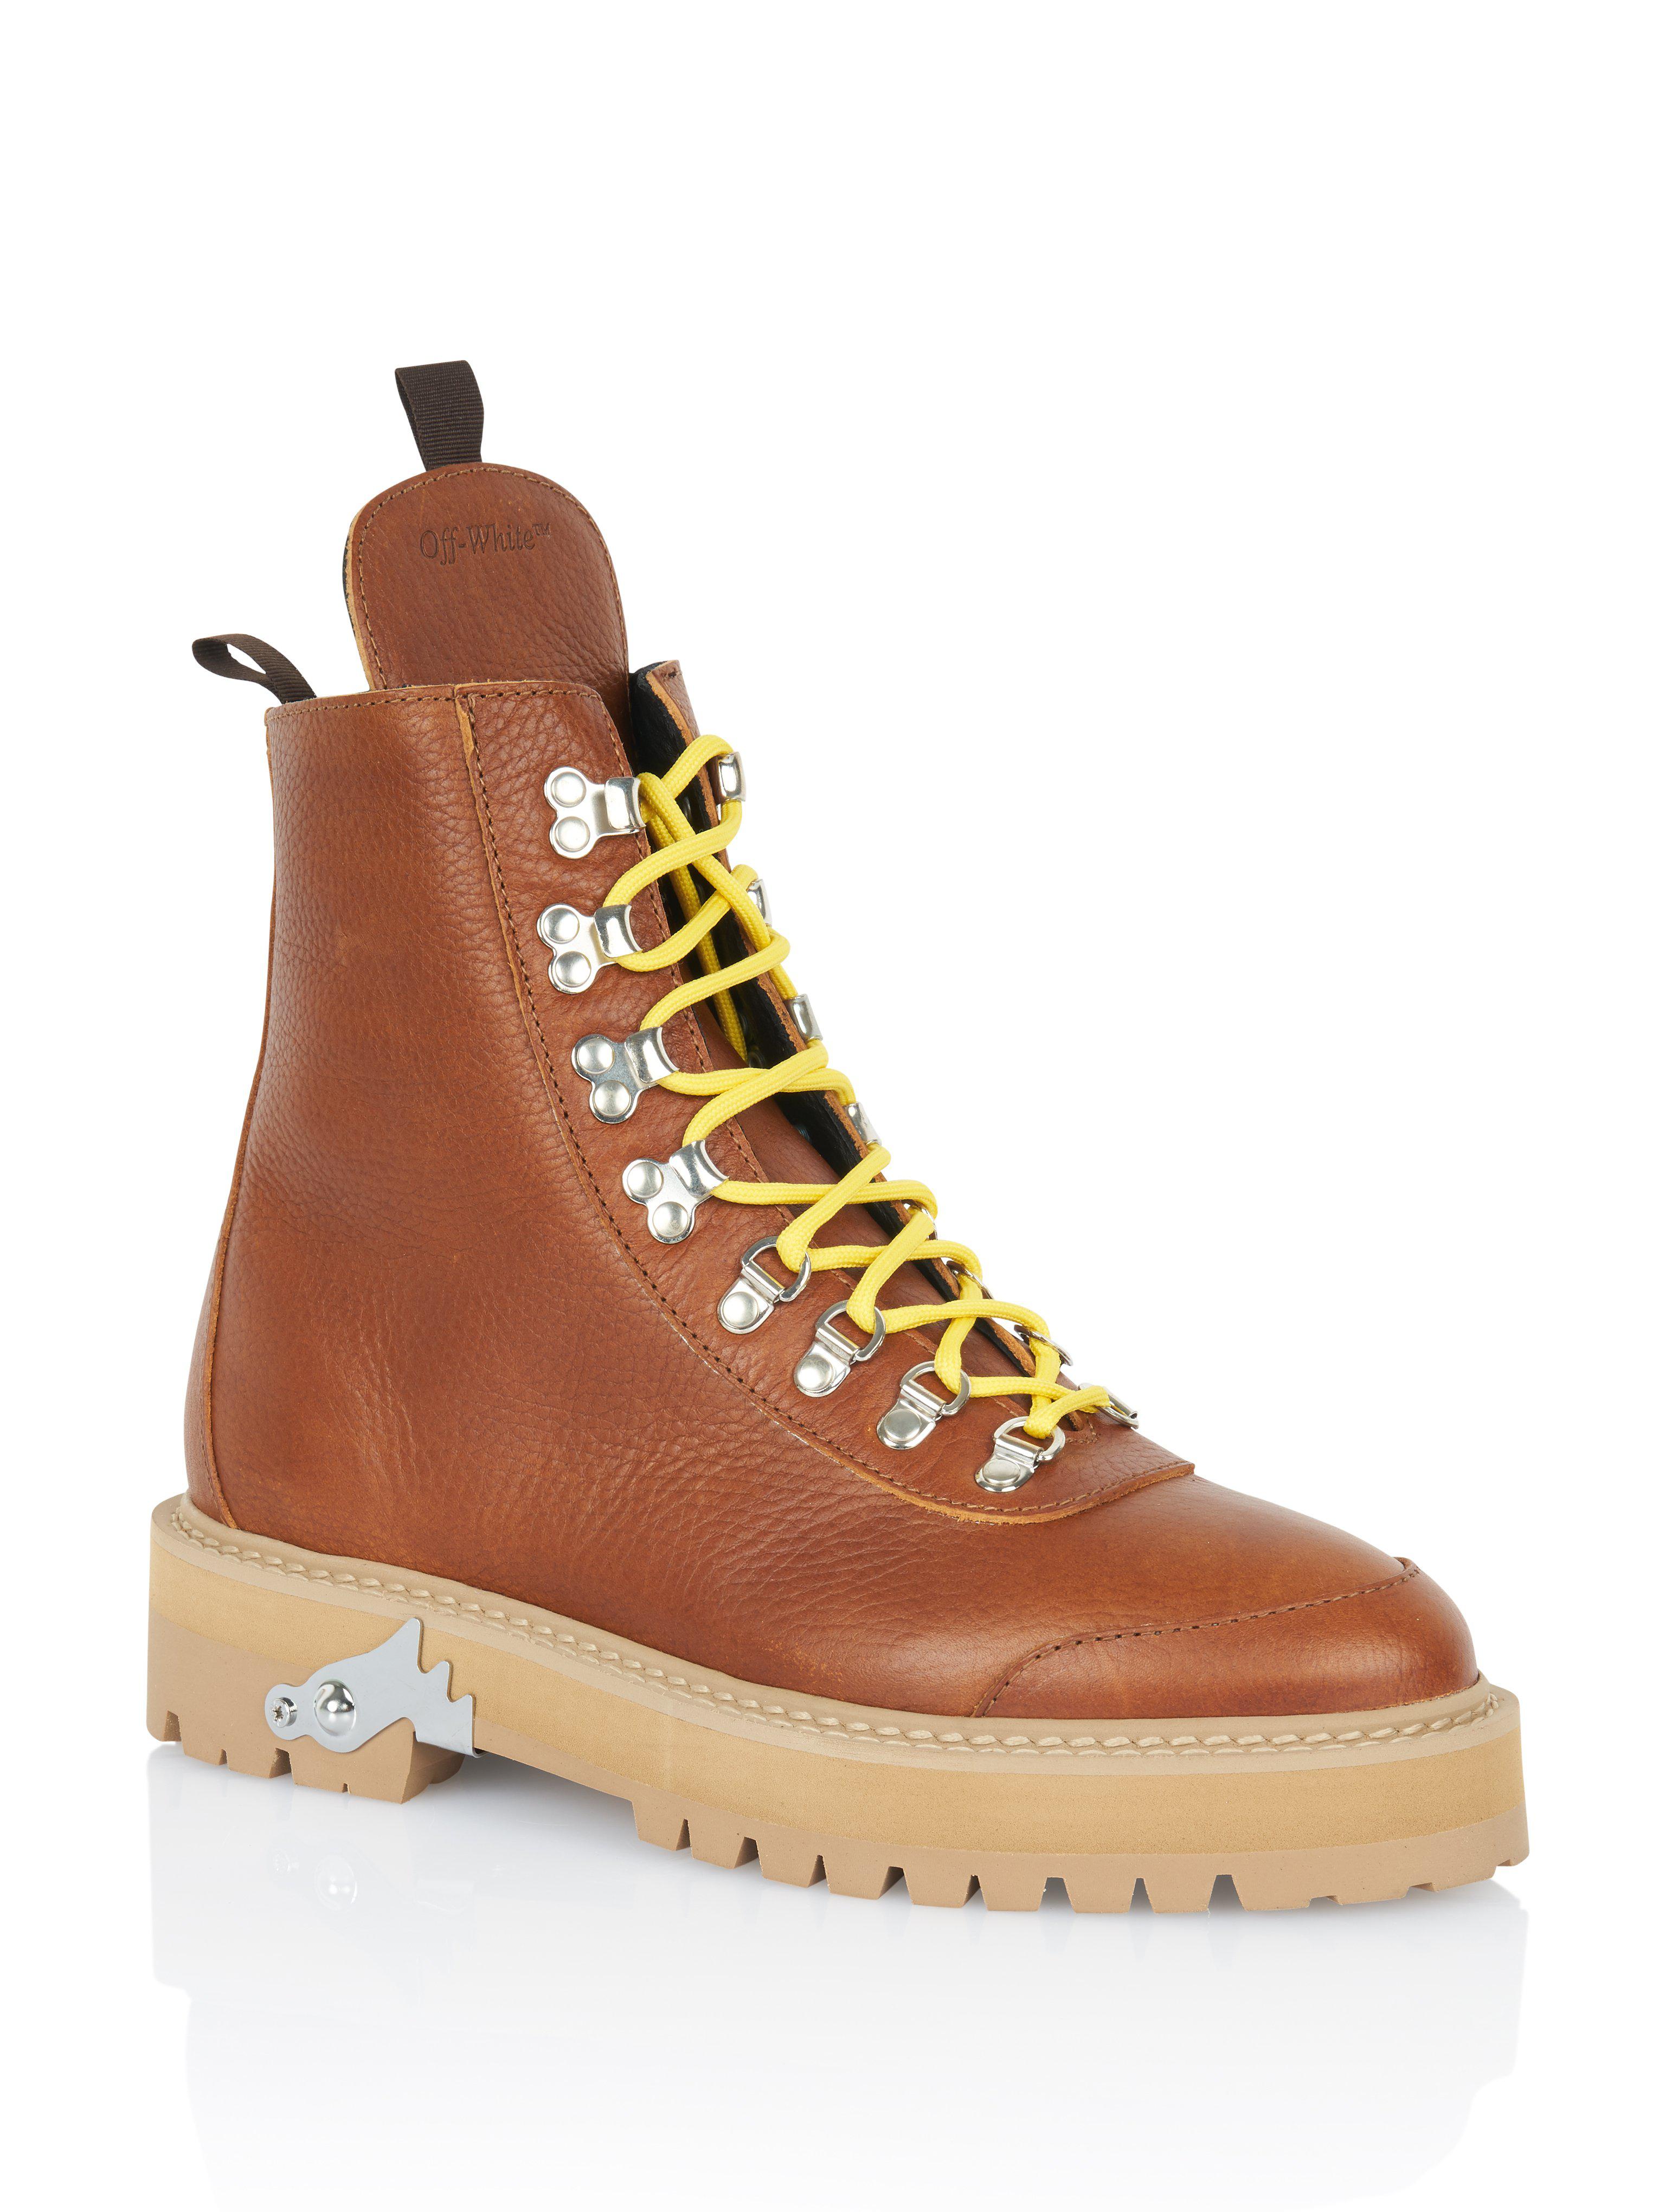 Off-White c/o Virgil Abloh Camel Lace-up Leather Hiking Boots in Brown ...